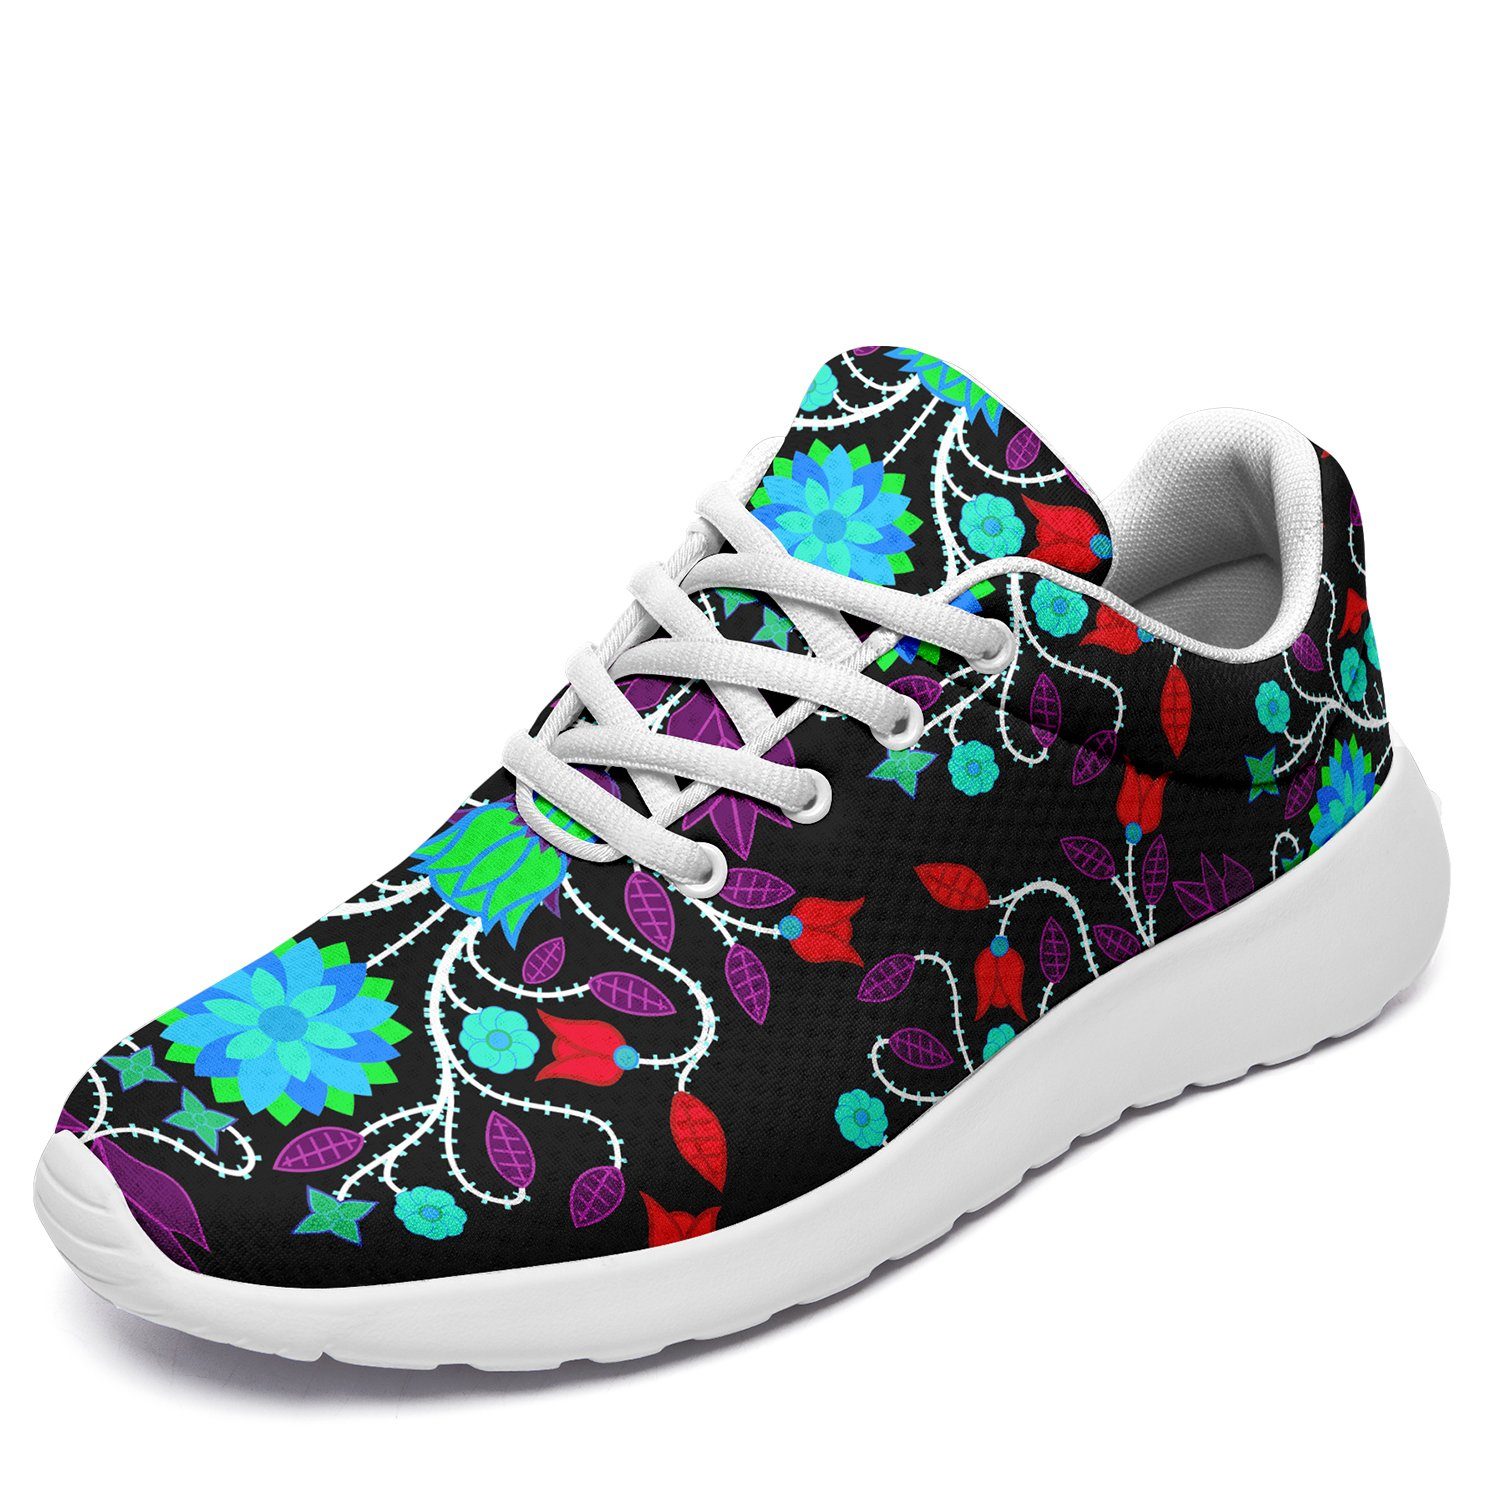 Floral Beadwork Four Clans Winter Ikkaayi Sport Sneakers 49 Dzine US Women 4.5 / US Youth 3.5 / EUR 35 White Sole 